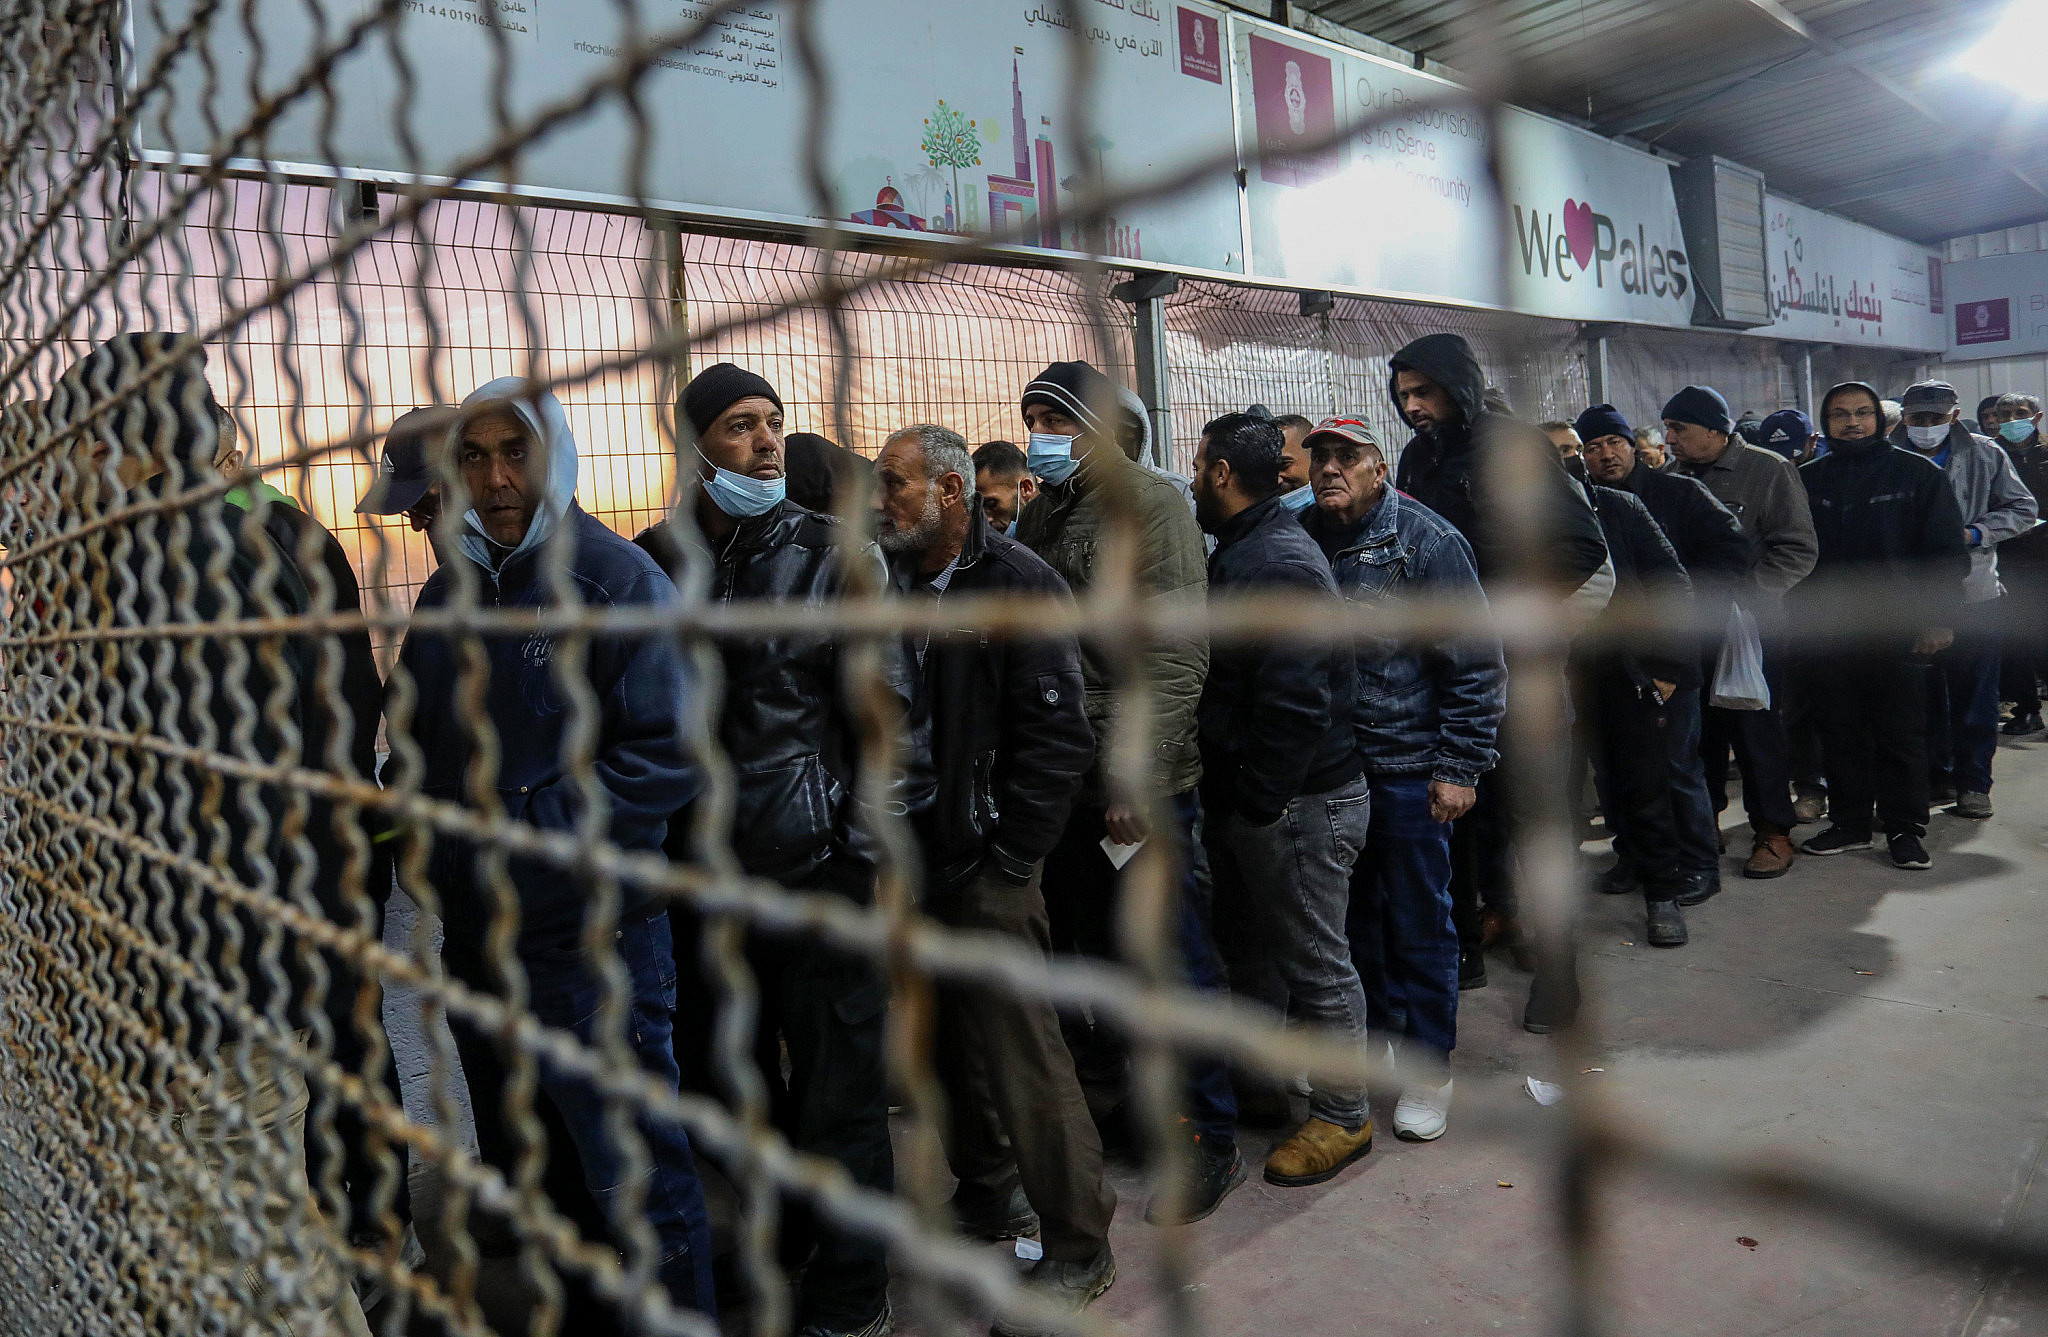 Palestinian workers at the Erez crossing in Beit Hanoun in the northern Gaza Strip, waiting to enter Israel for work, March 13, 2022. (Attia Muhammed/Flash90 )